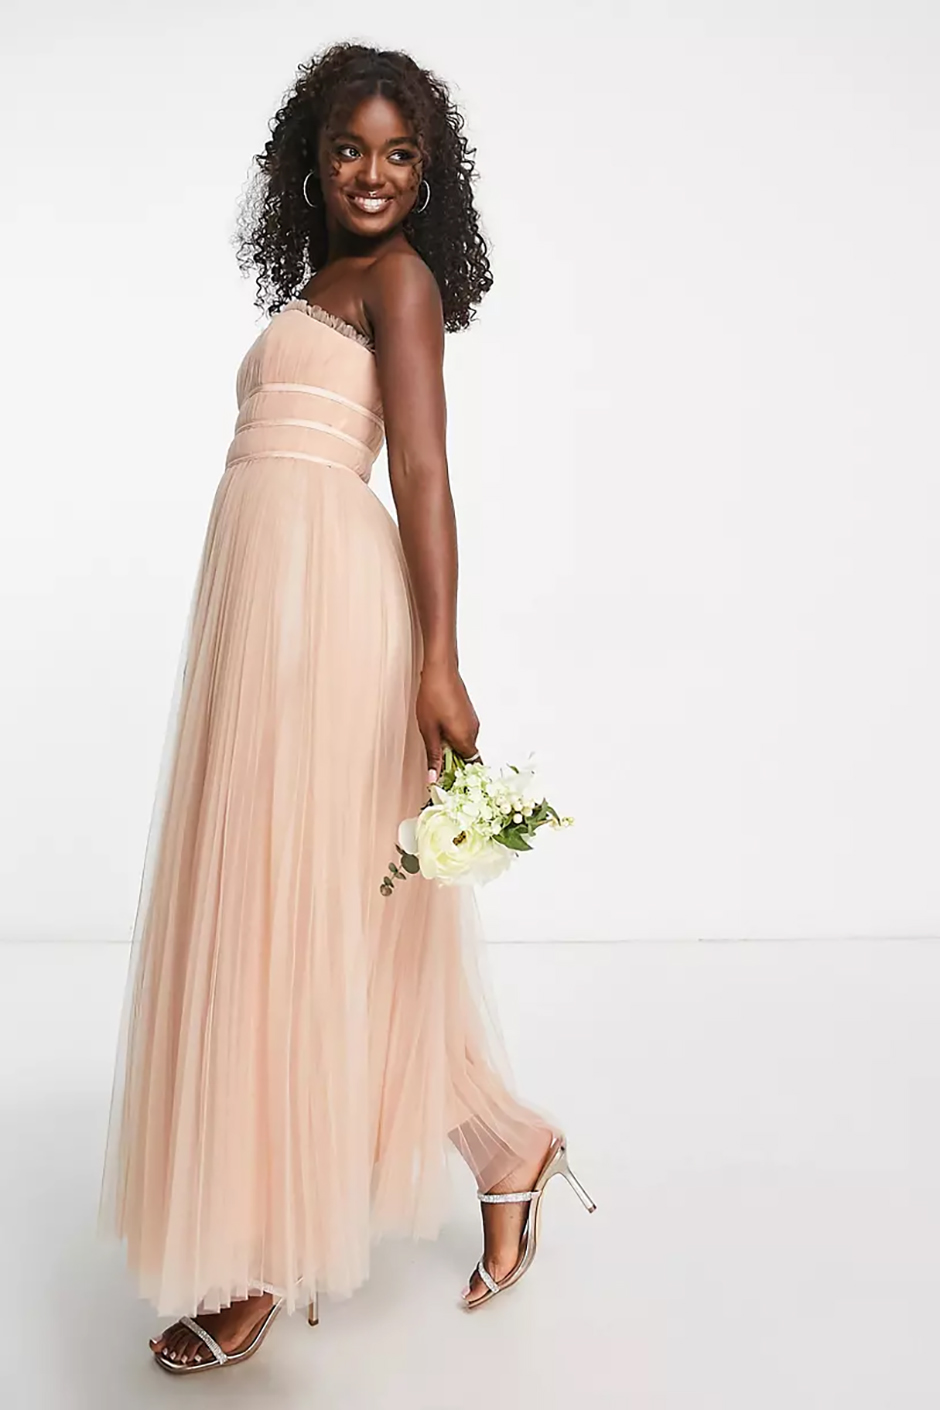 Blush peach bridesmaid dress from ASOS with strapless design and tulle maxi skirt